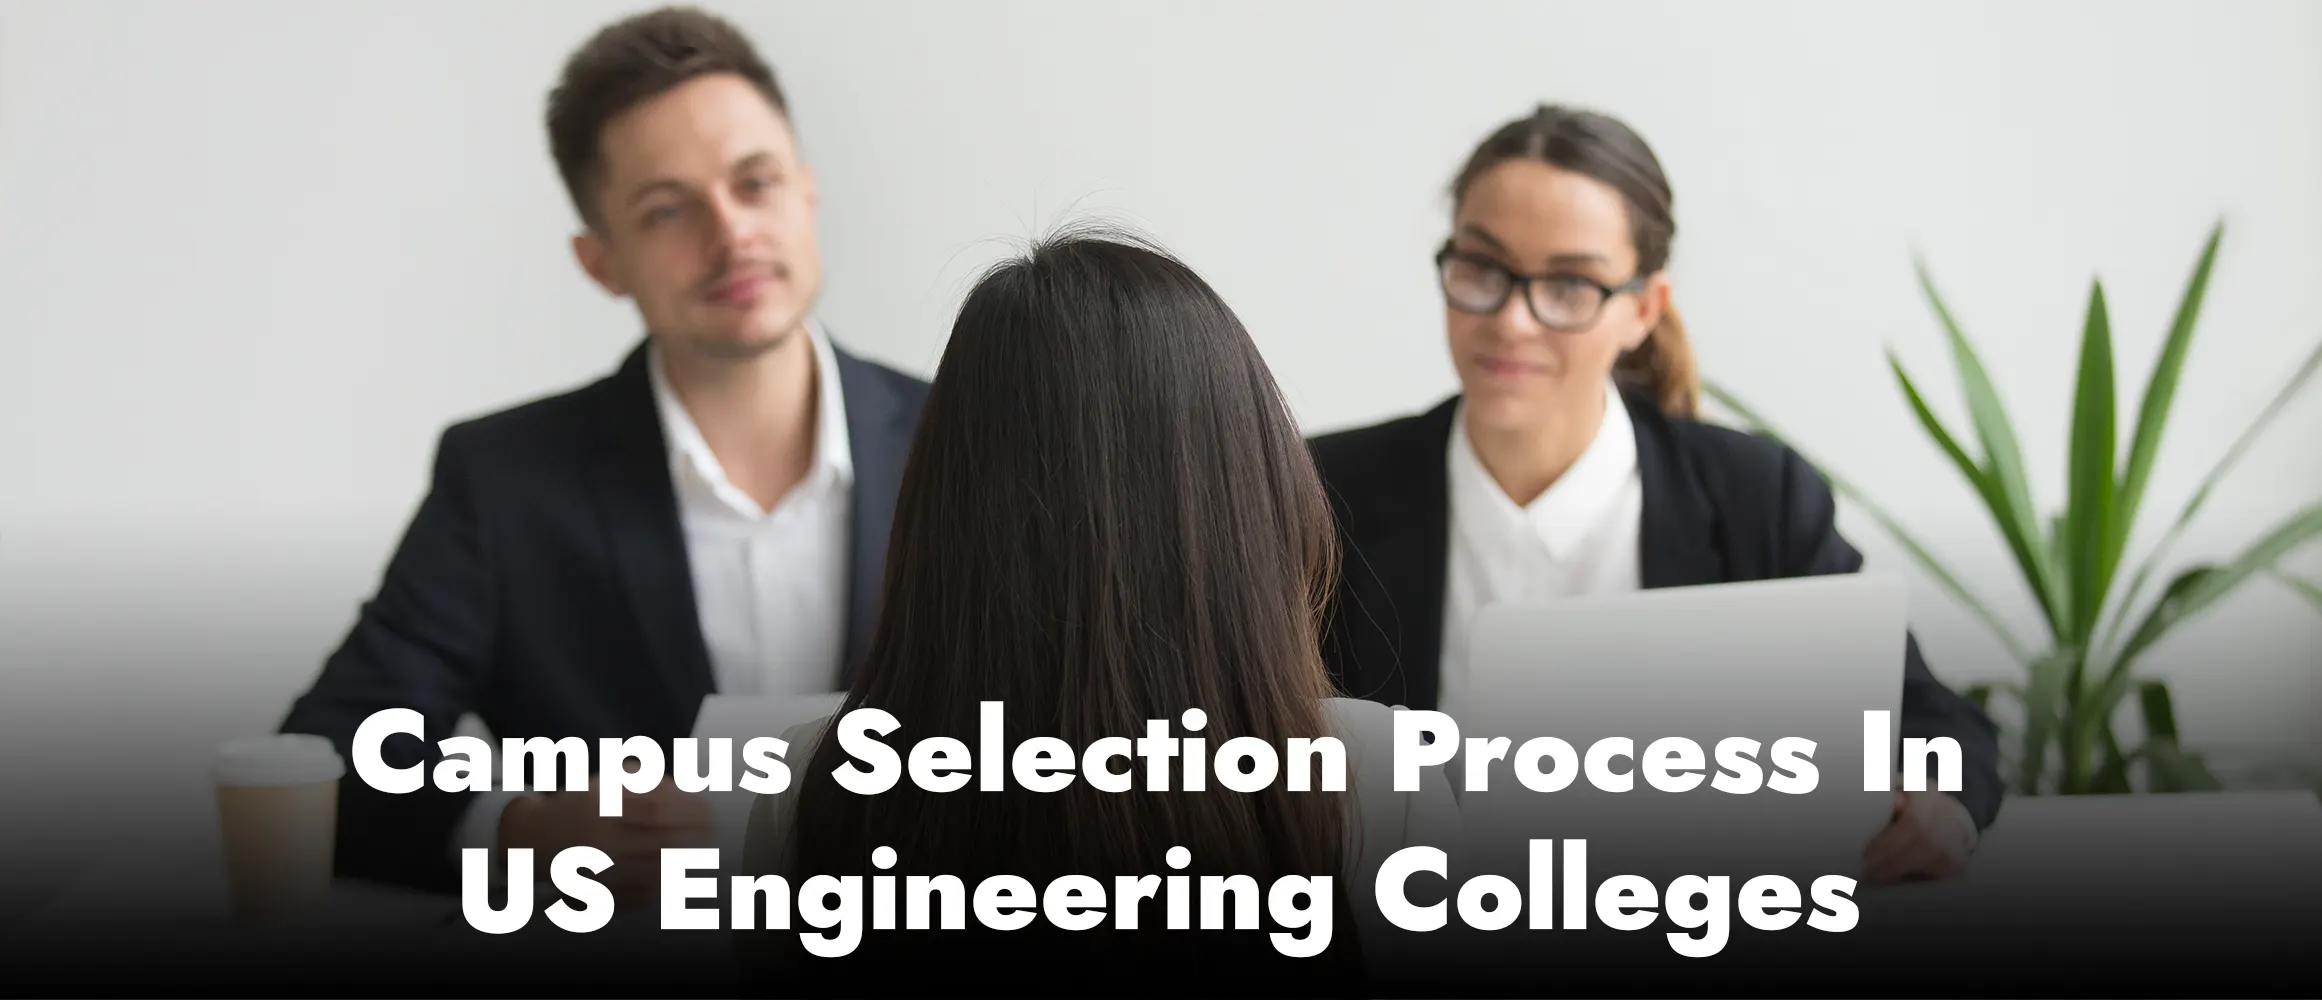 Campus Selection Process In Engineering Colleges In Us